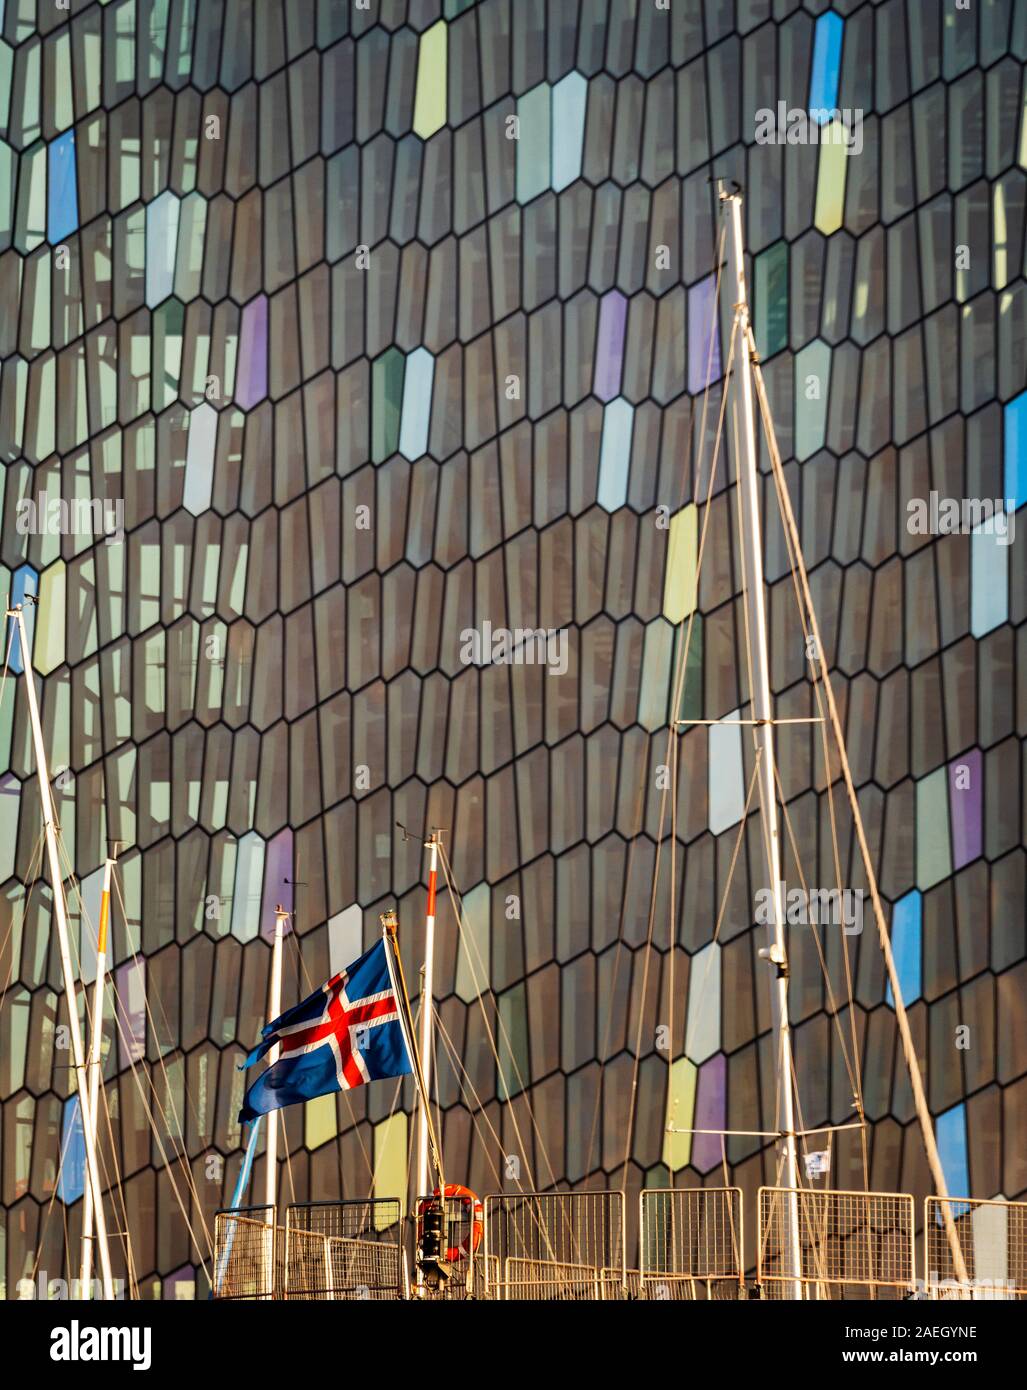 Icelandic Flag with Harpa in the backgrounds, Reykjavik, Iceland Stock Photo